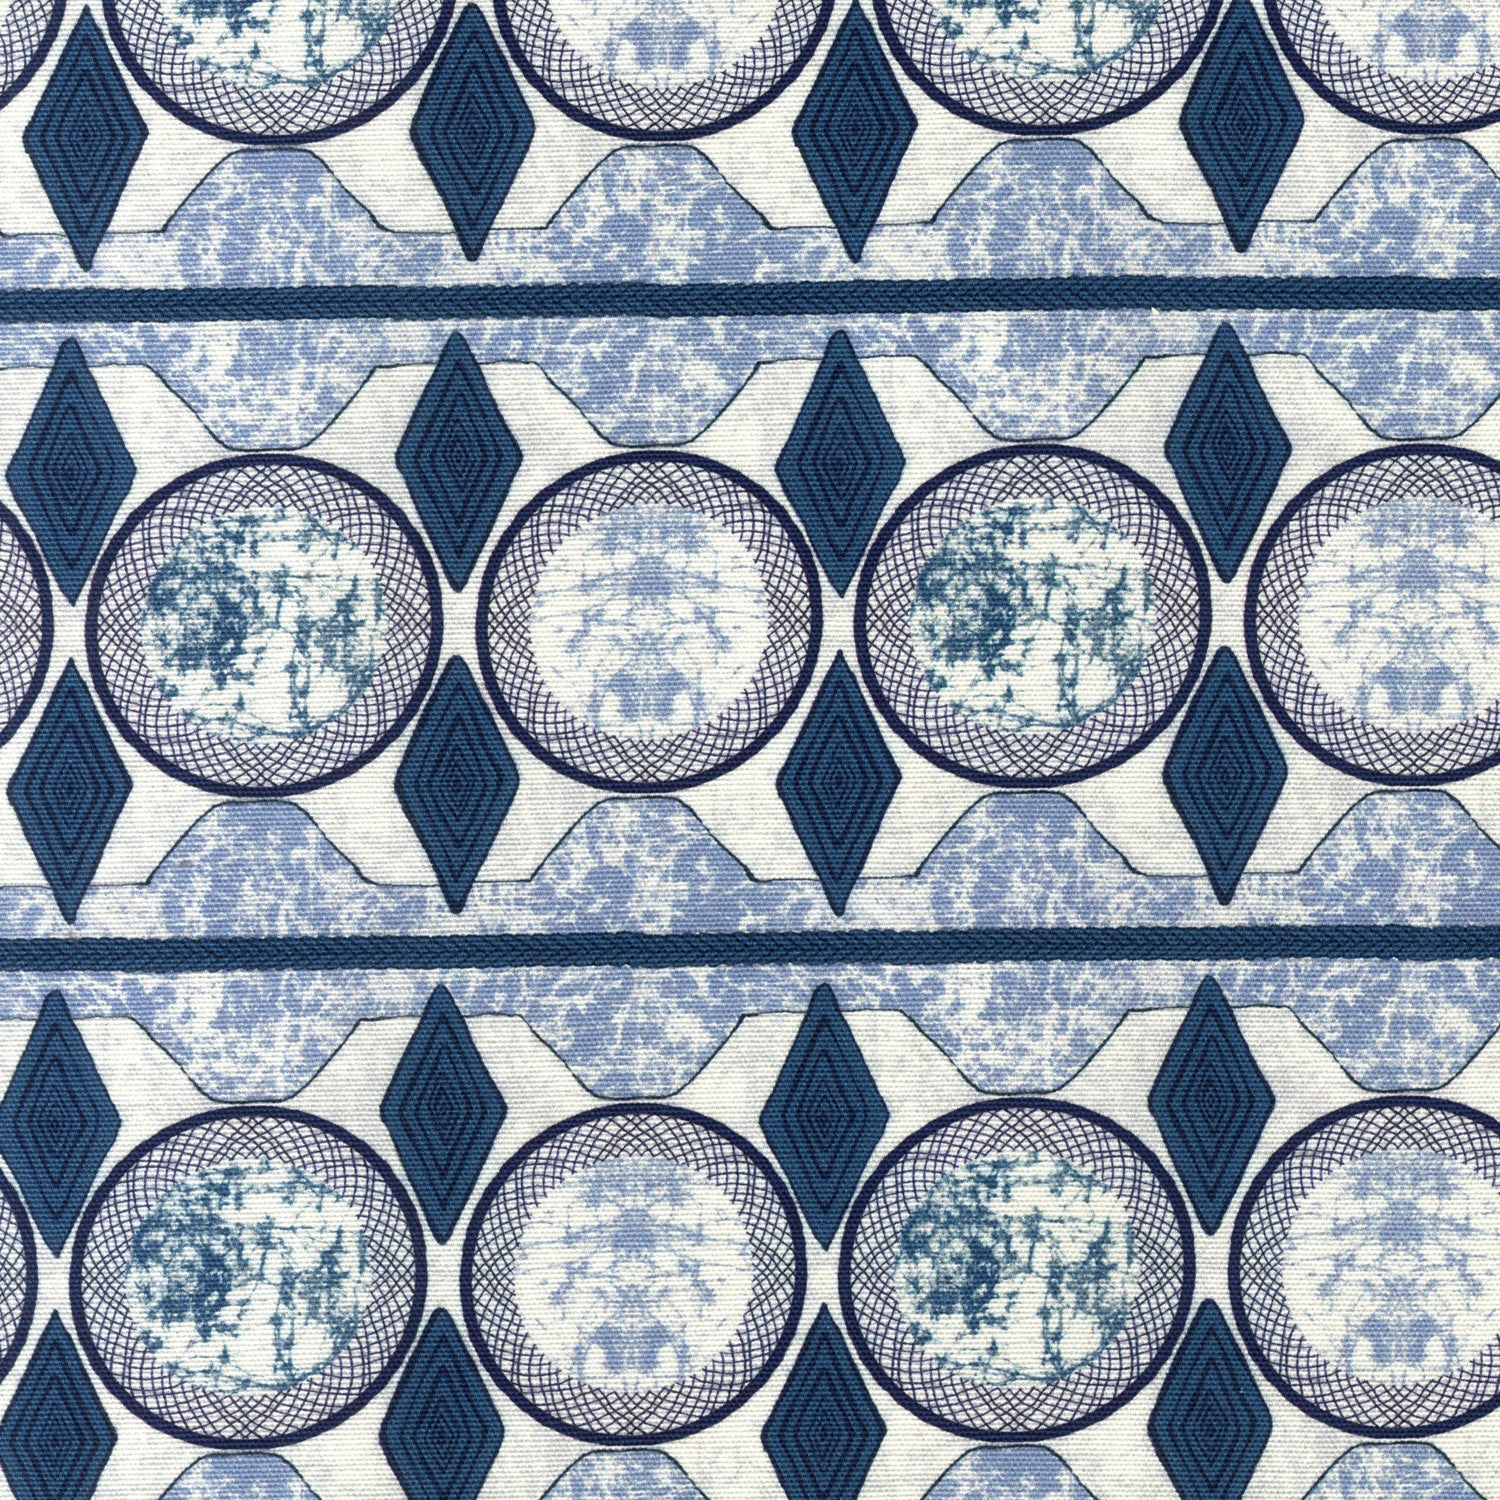 Detail of fabric in an intricate geometric stripe in shades of blue, navy and cream.